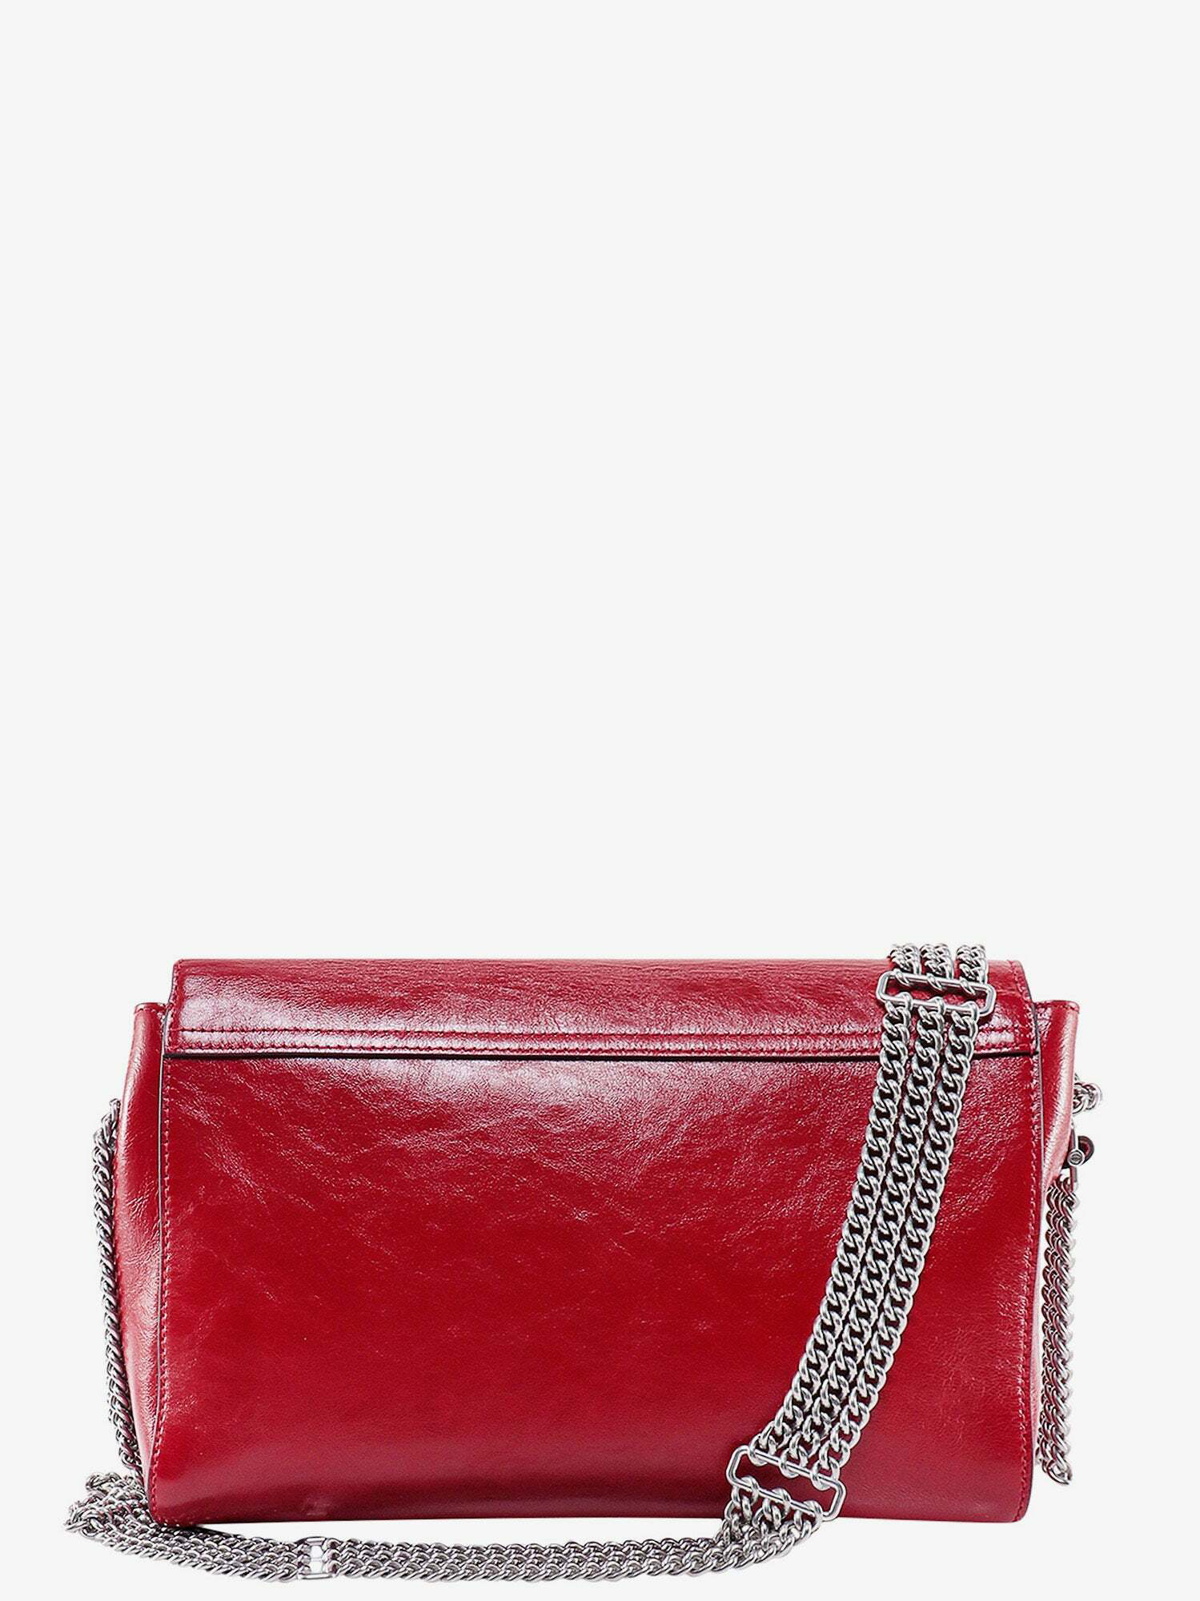 Mulberry Envelope Wallet / Purse in Red Shiny Goat Leather - SOLD